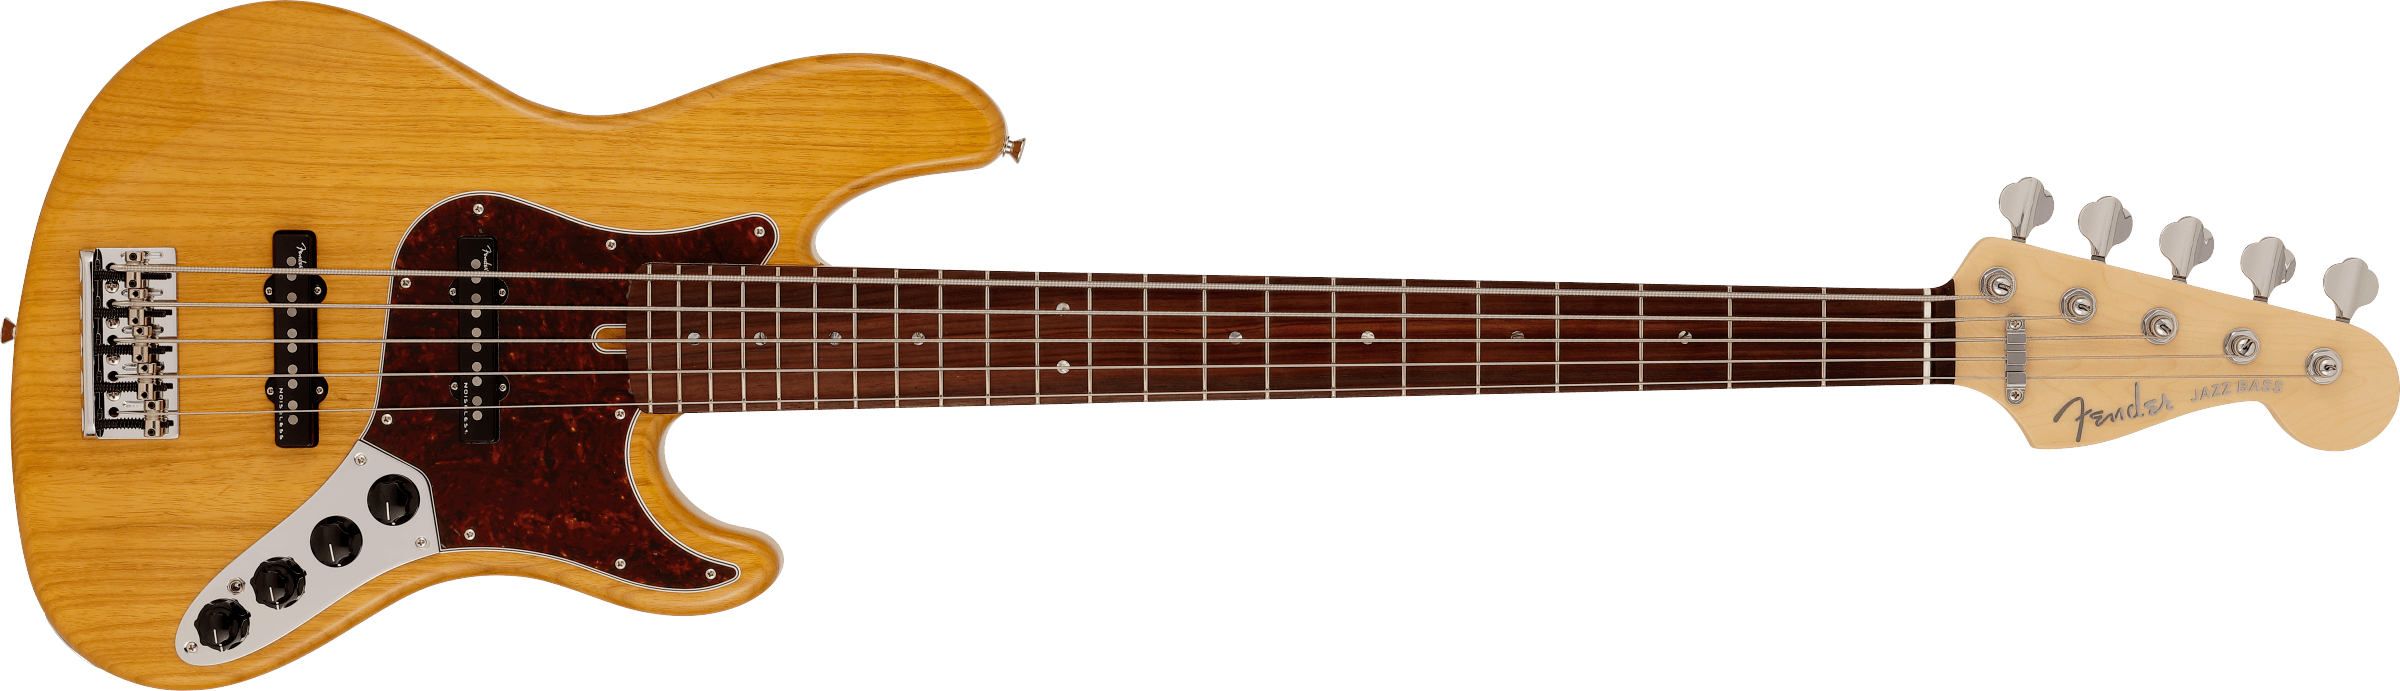 MADE IN JAPAN LIMITED DELUXE JAZZ BASS® V Fender, 49% OFF